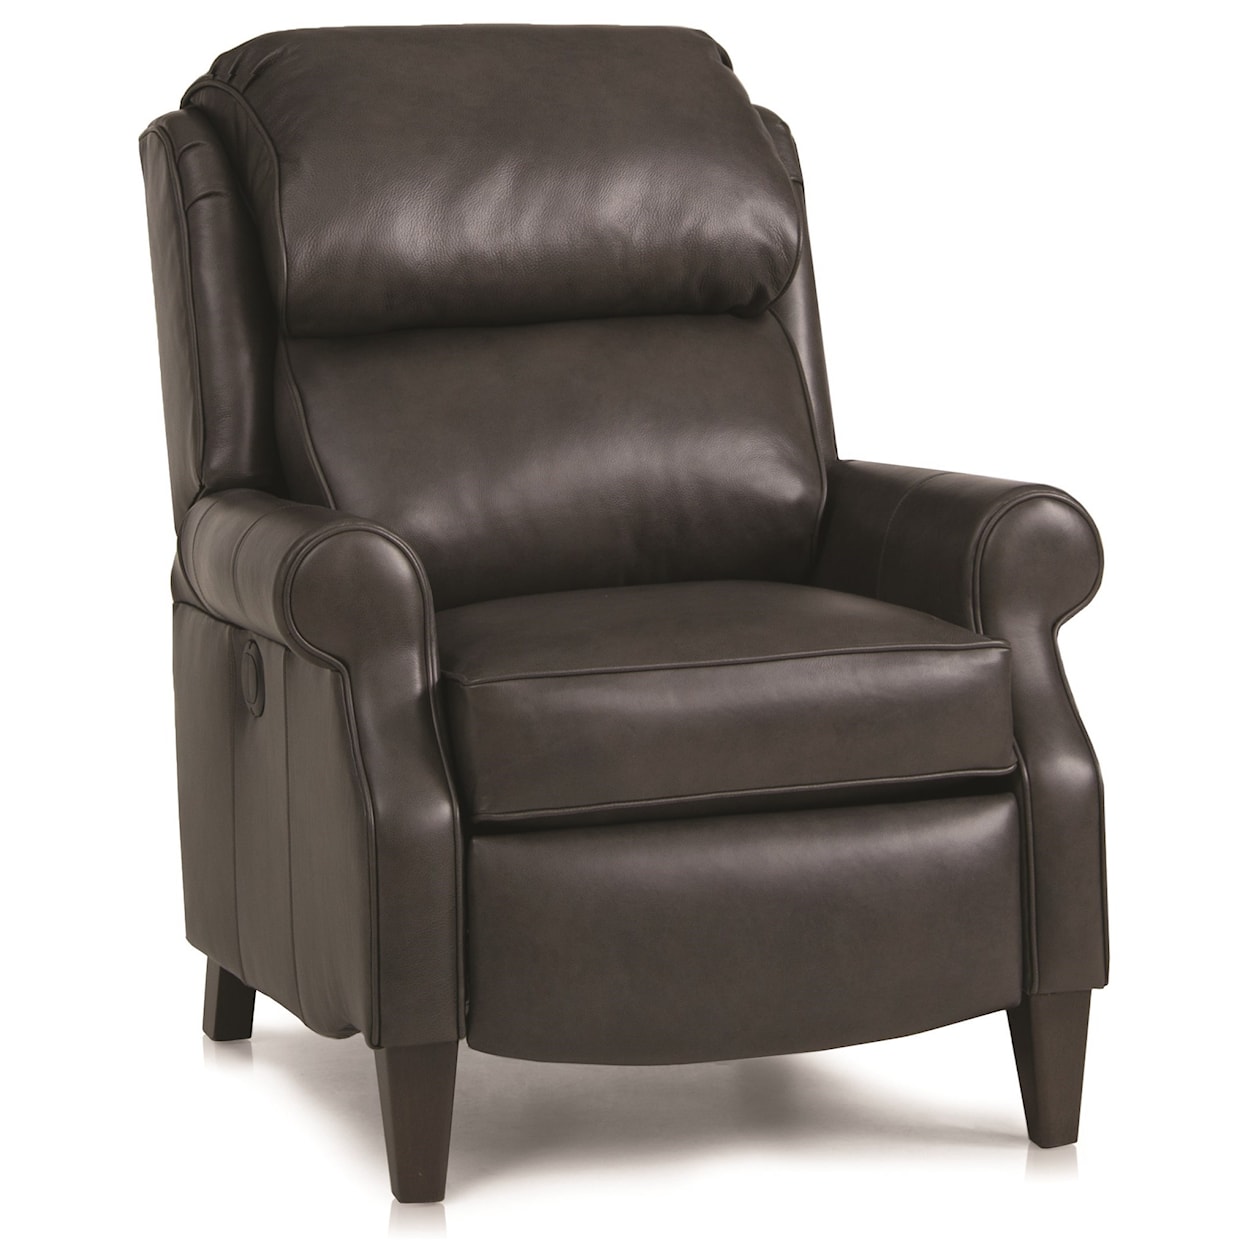 Smith Brothers Smith Brothers Traditional B/T Motorized Reclining Chair